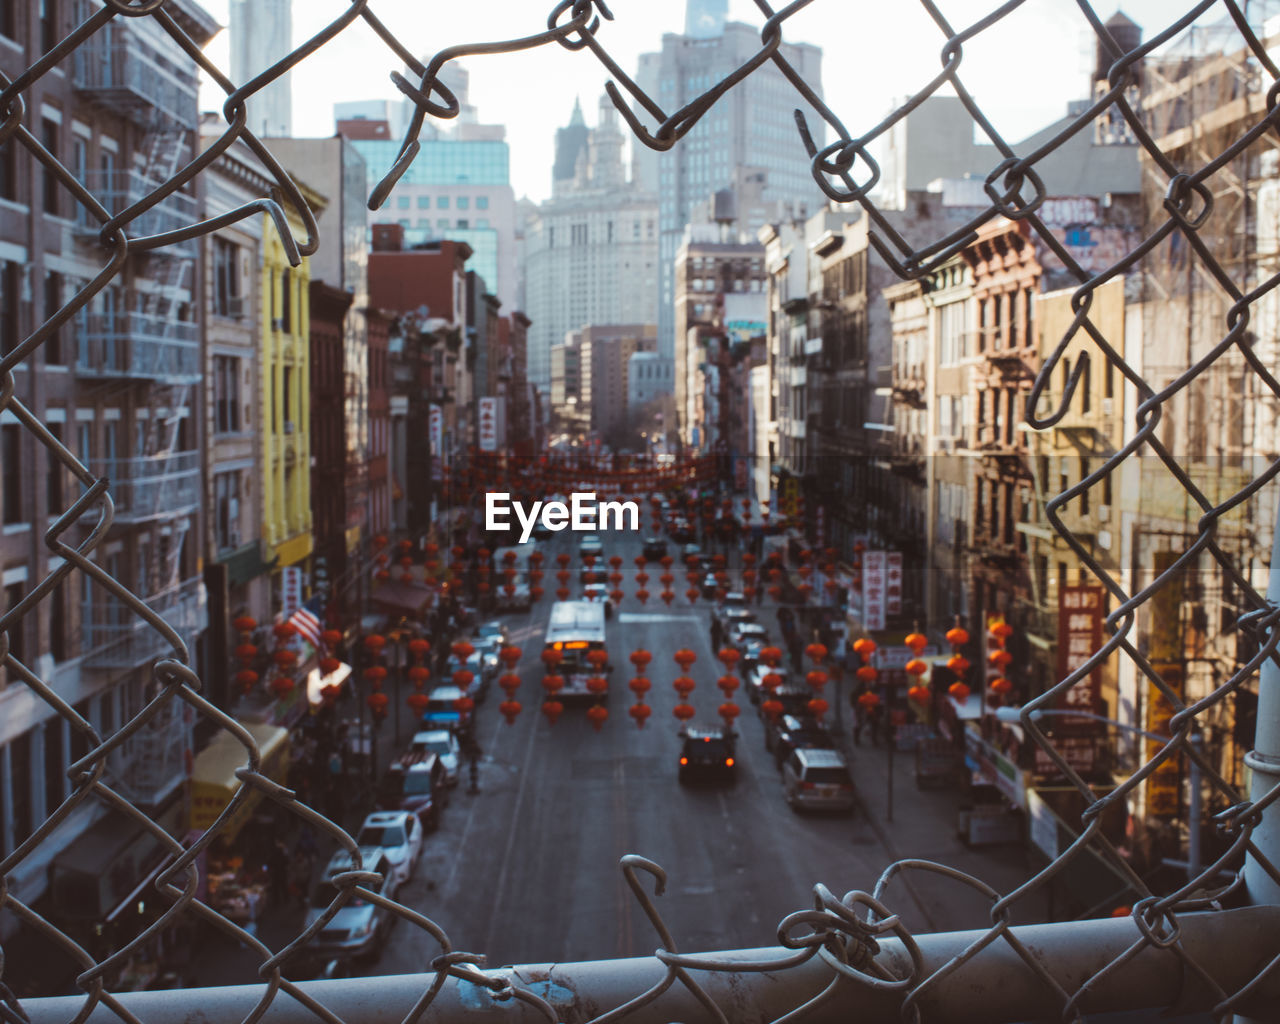 Aerial view of city street seen through chainlink fence